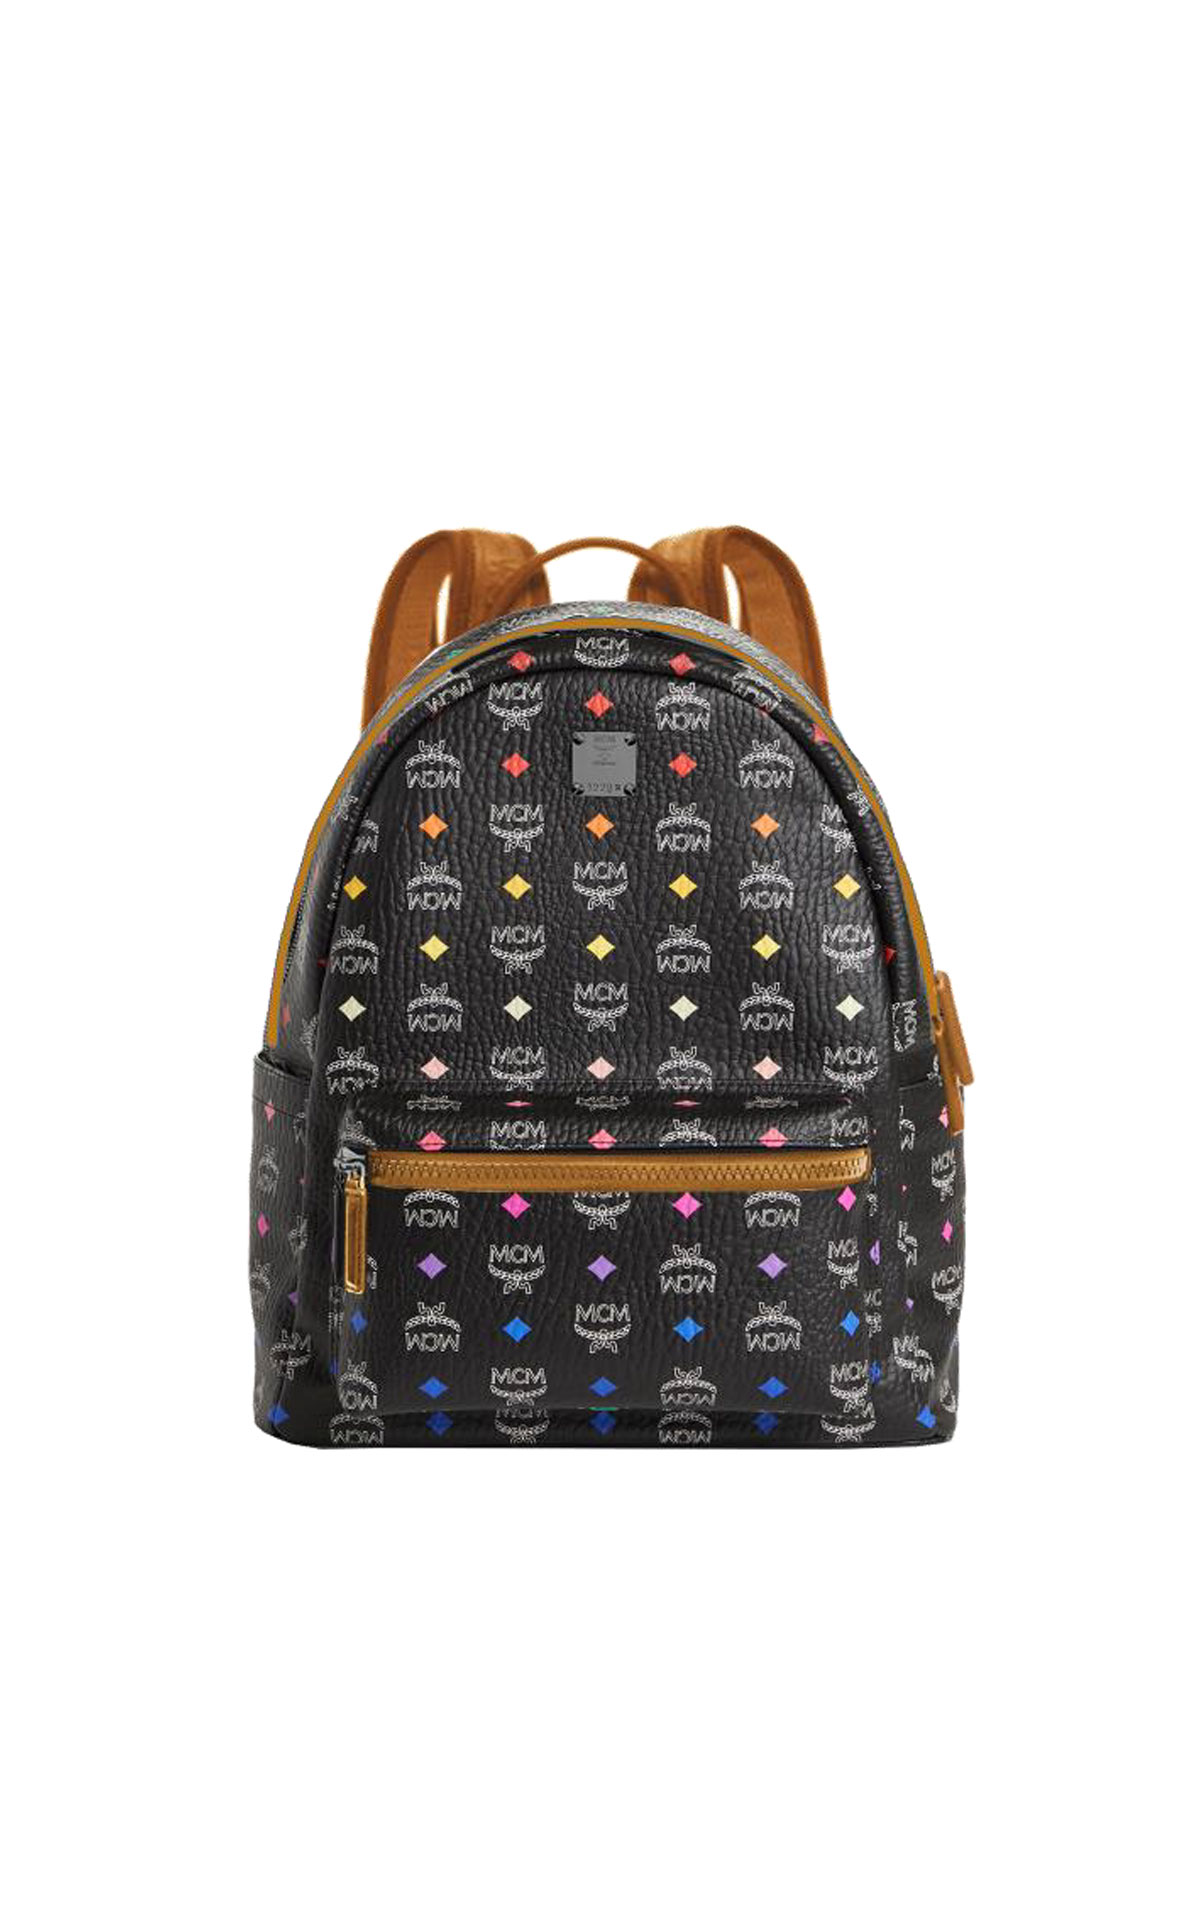 MCM Stark backpack small from Bicester Village